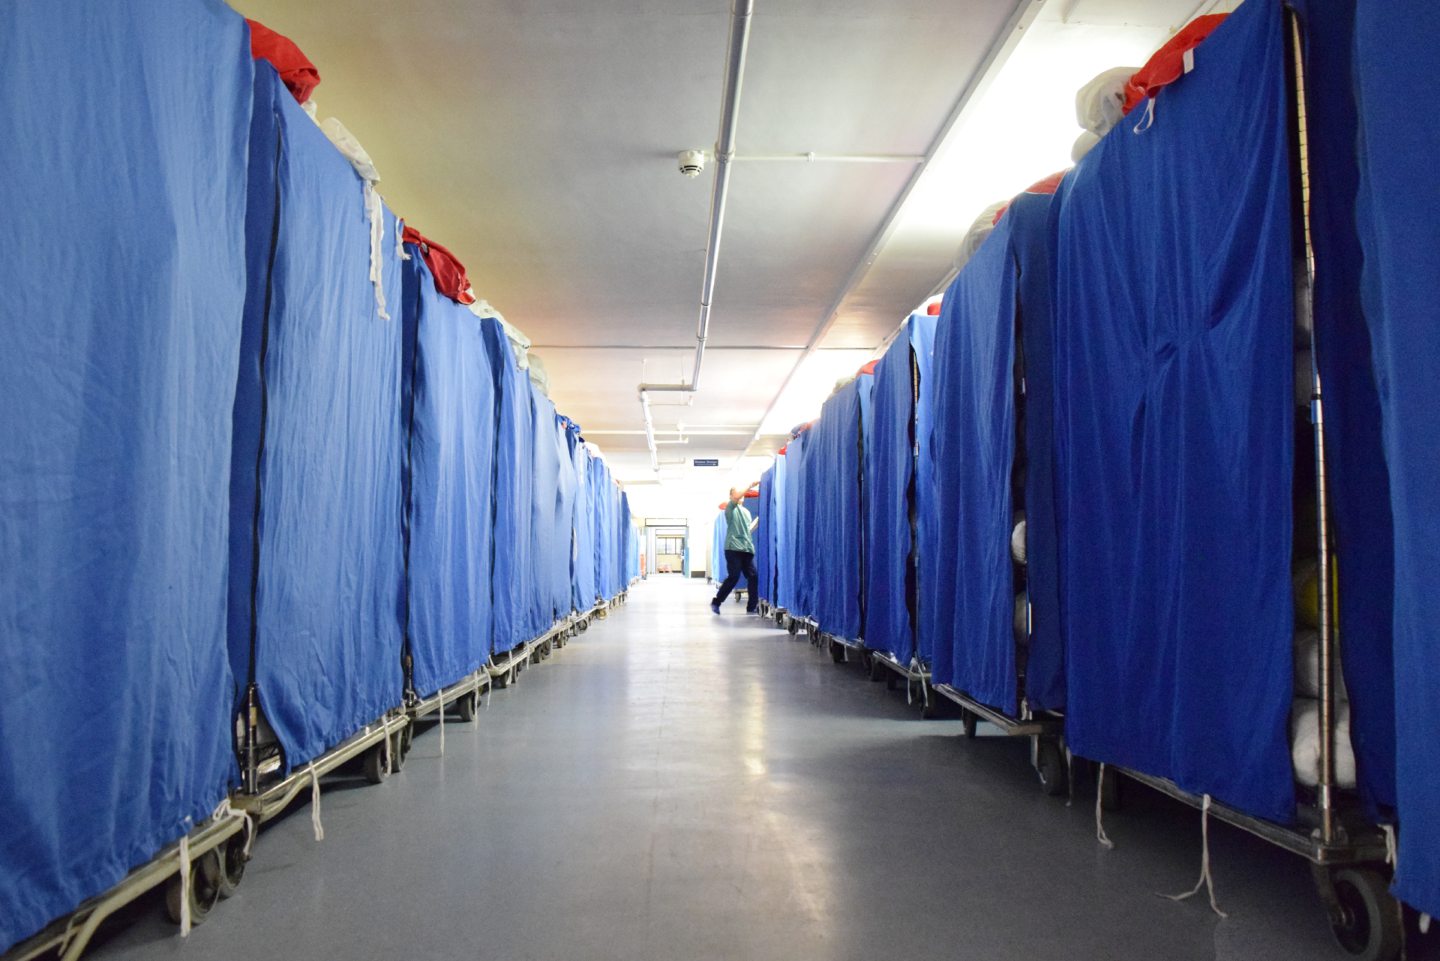 Tens of thousands of items are washed by NHS laundries every day.